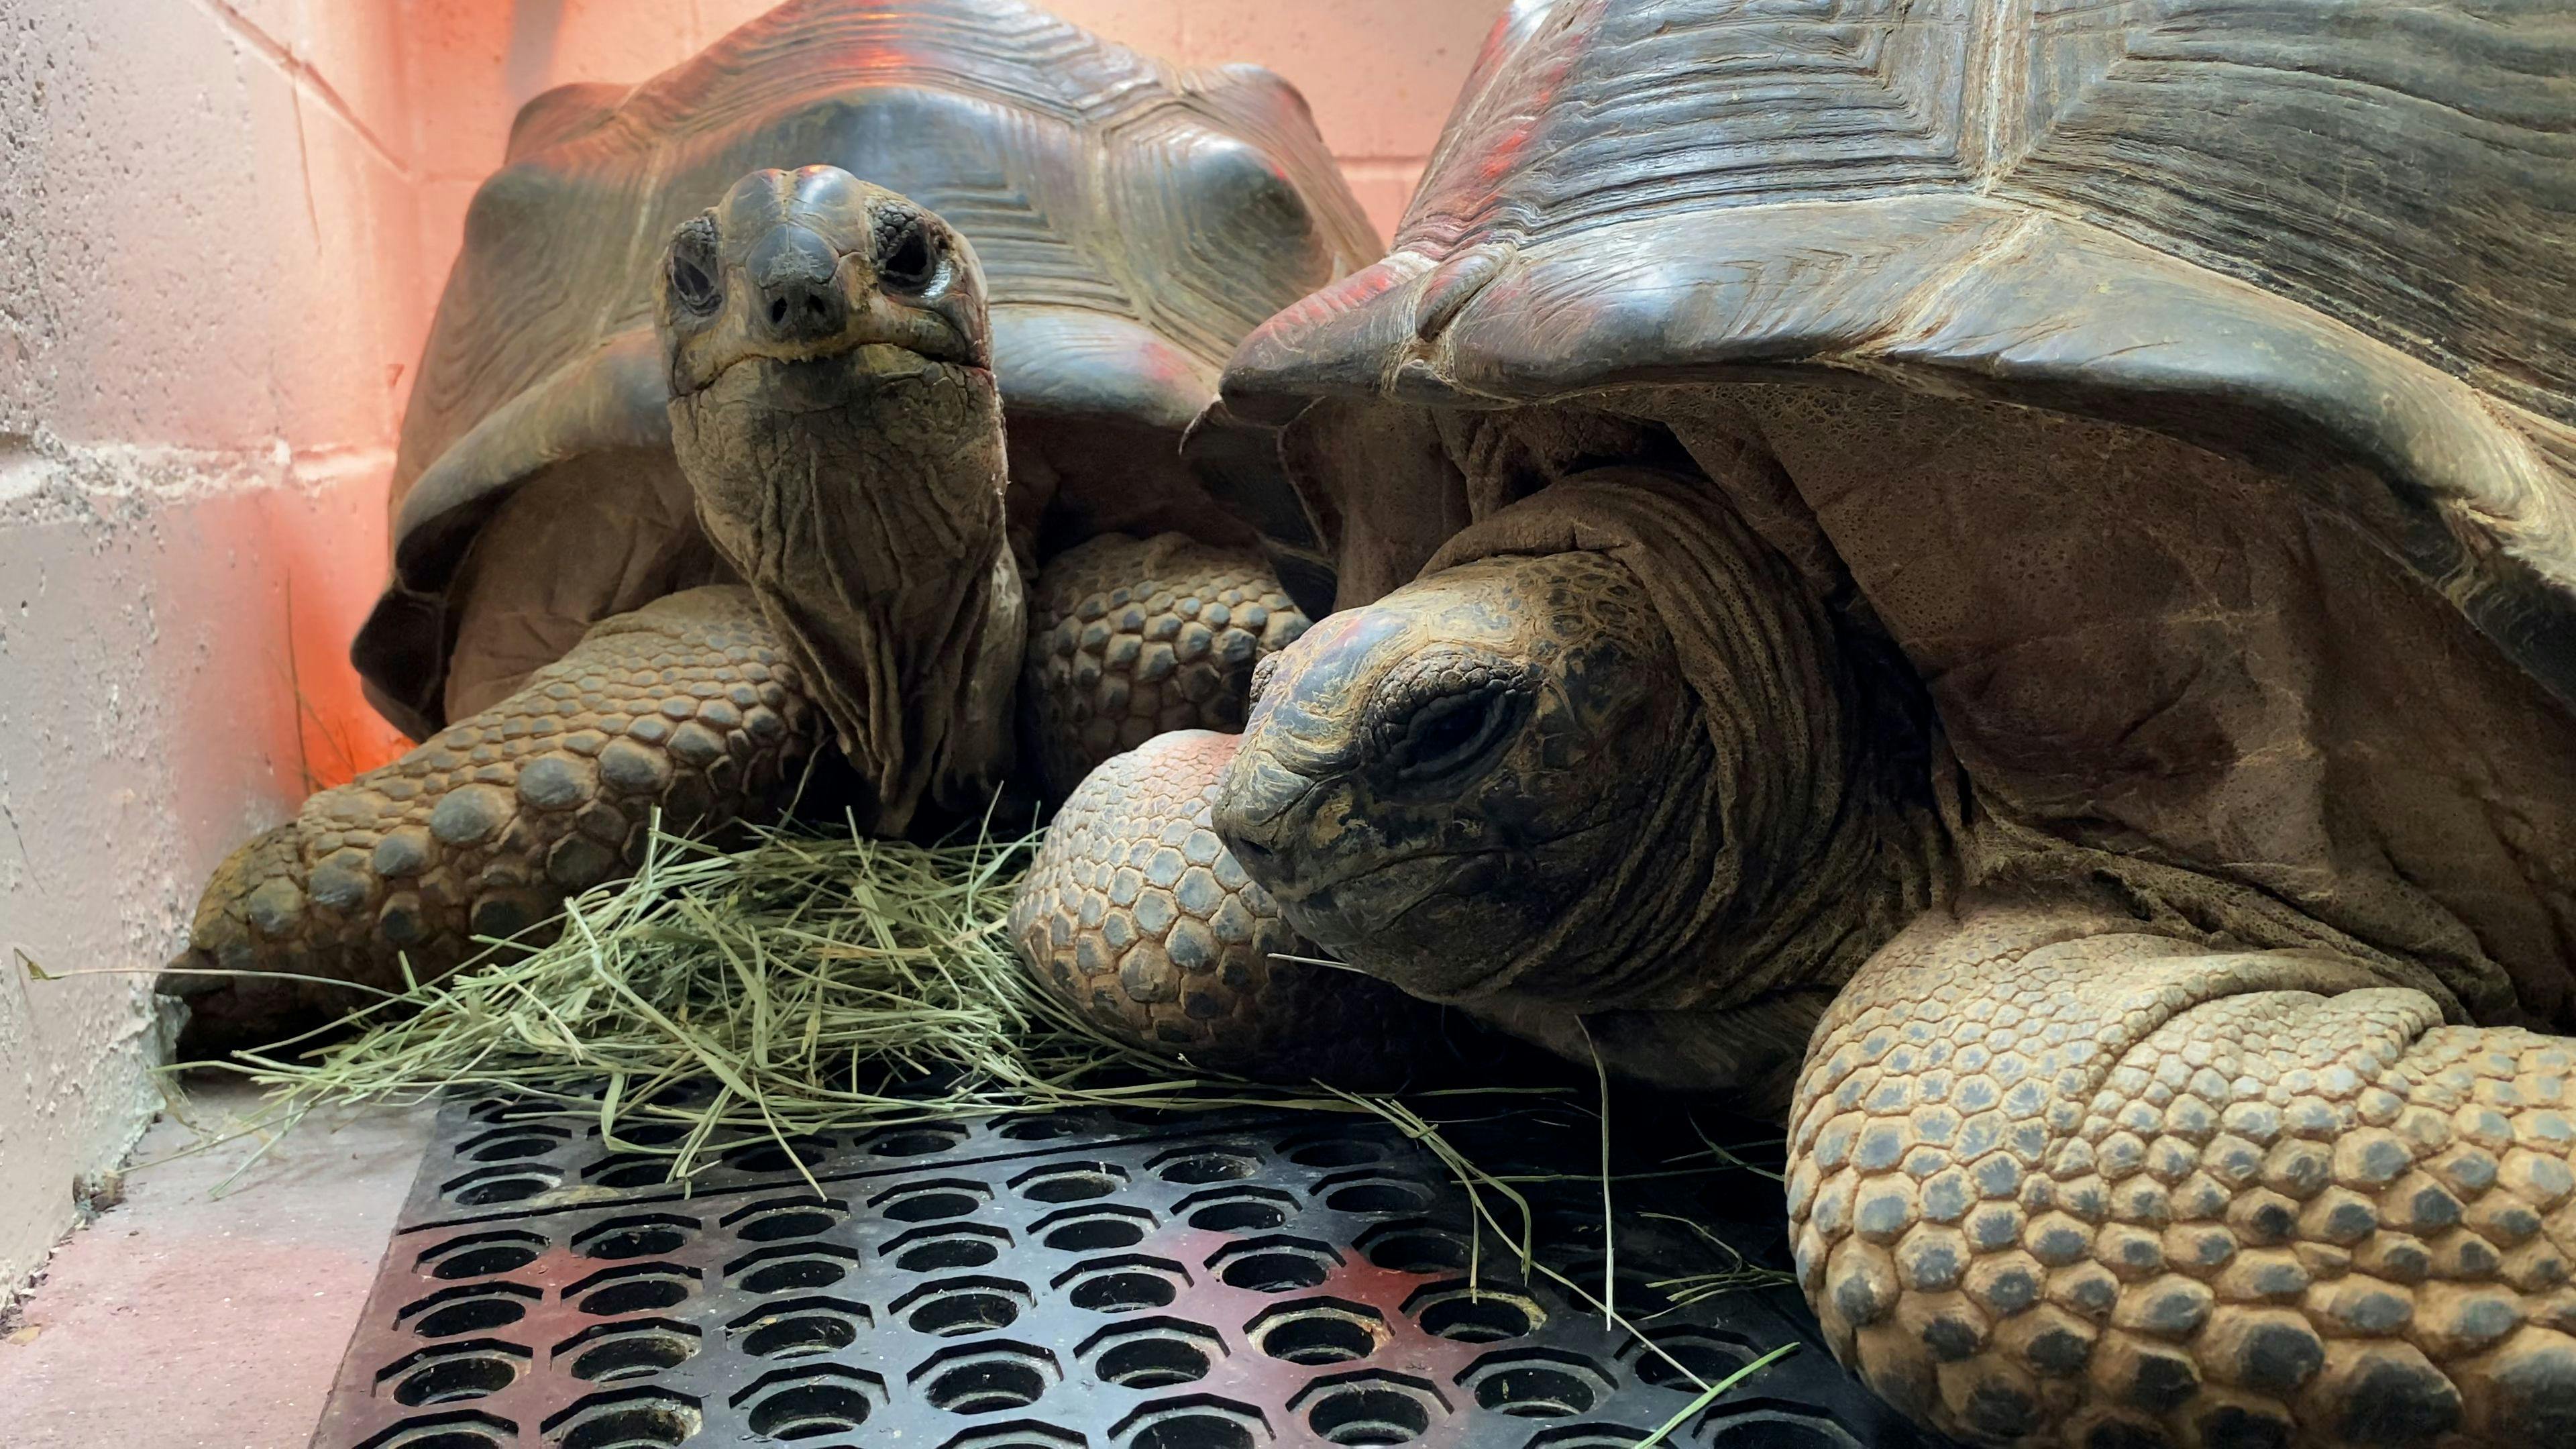 Oakland Zoo welcomes 2 rescued tortoises 